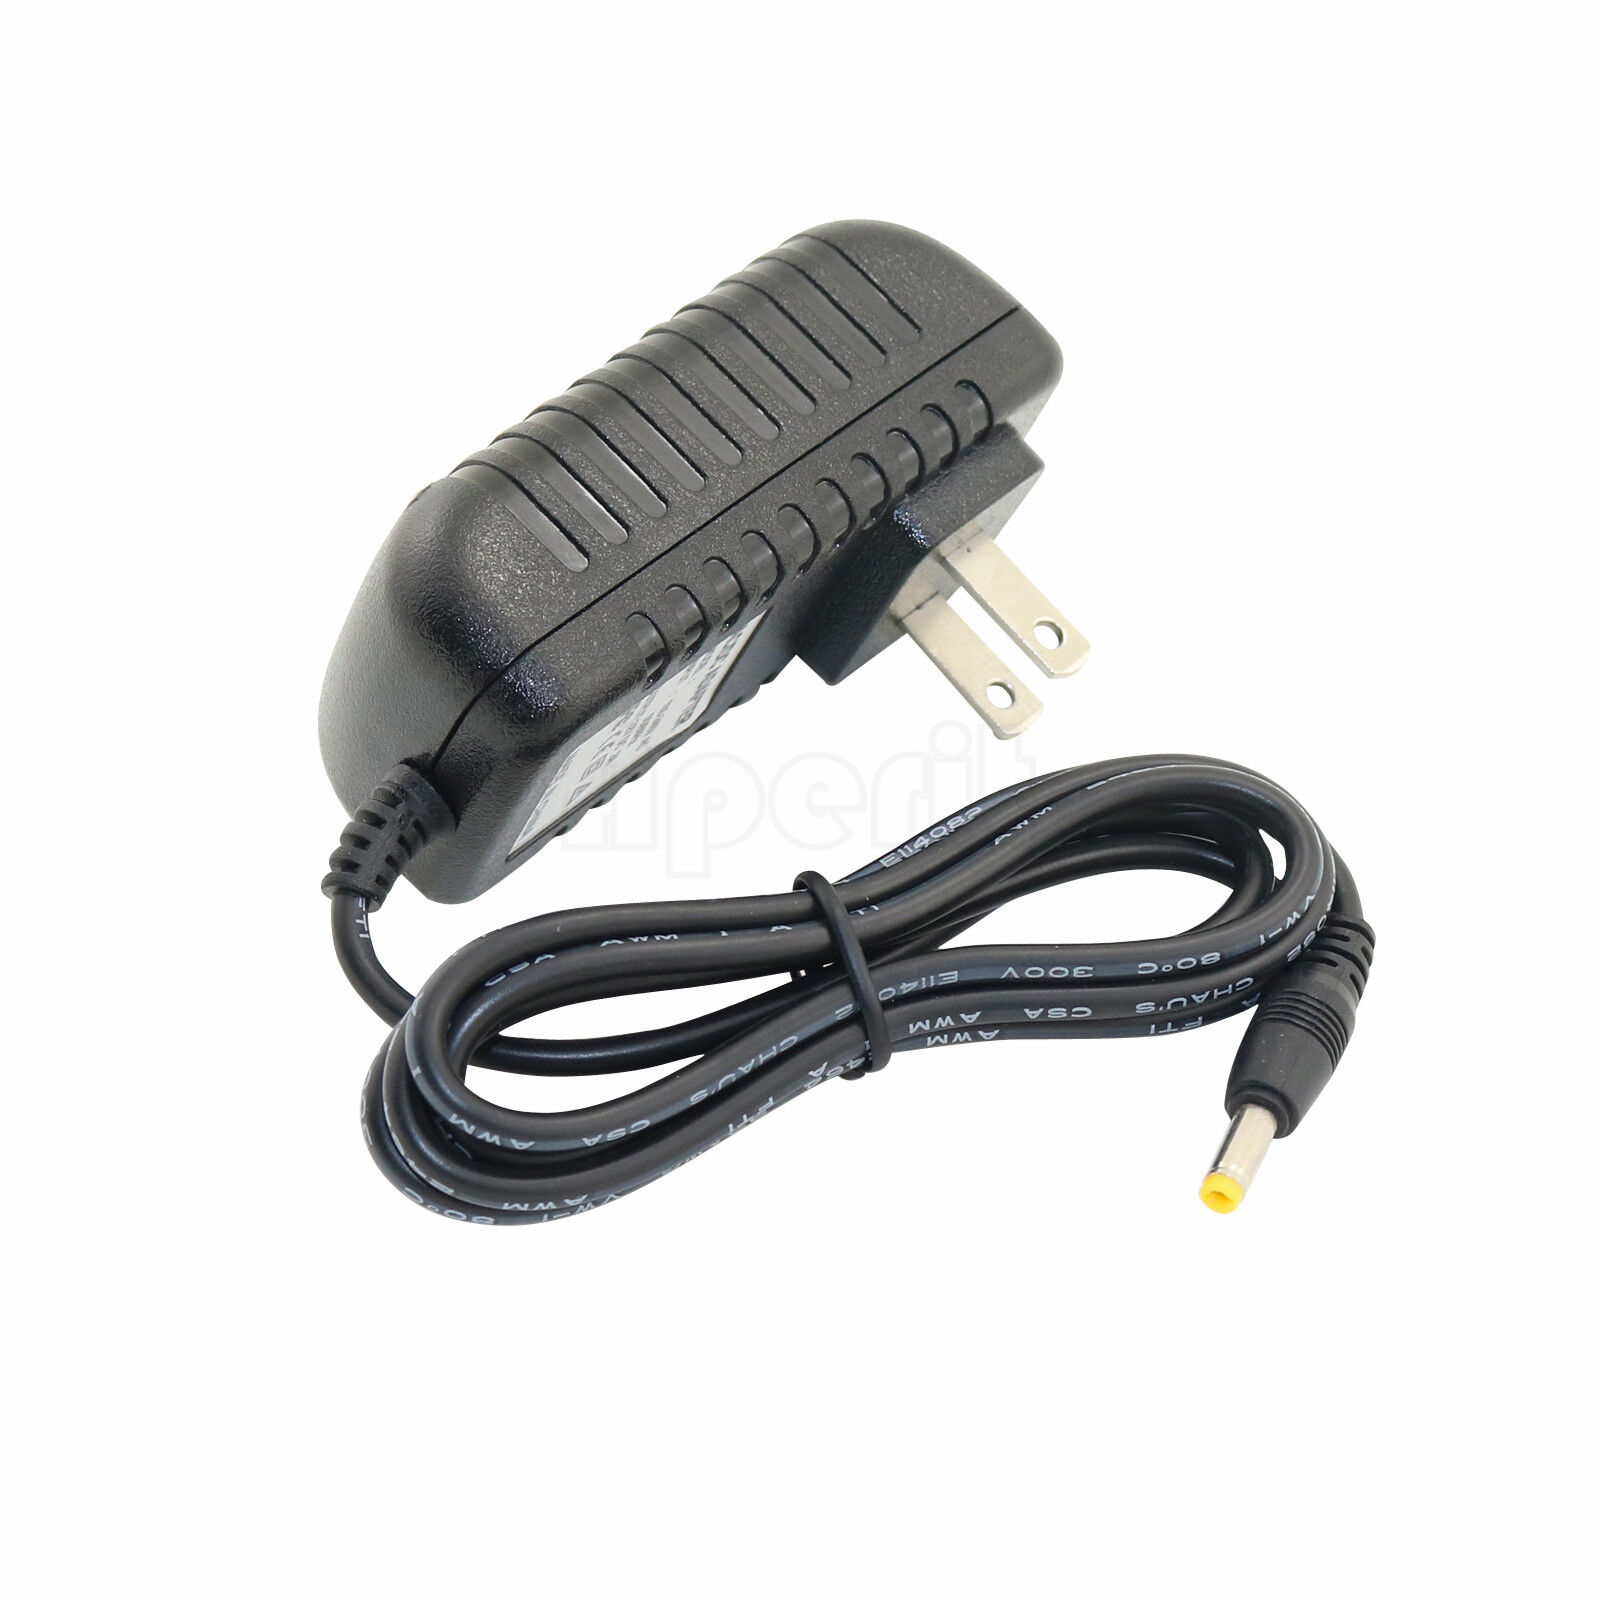 *Brand NEW* Boss RPH-10 RPQ-10 RPS-10 RPW-7 RRV-10 Pedal Charger AC Adapter Power Supply